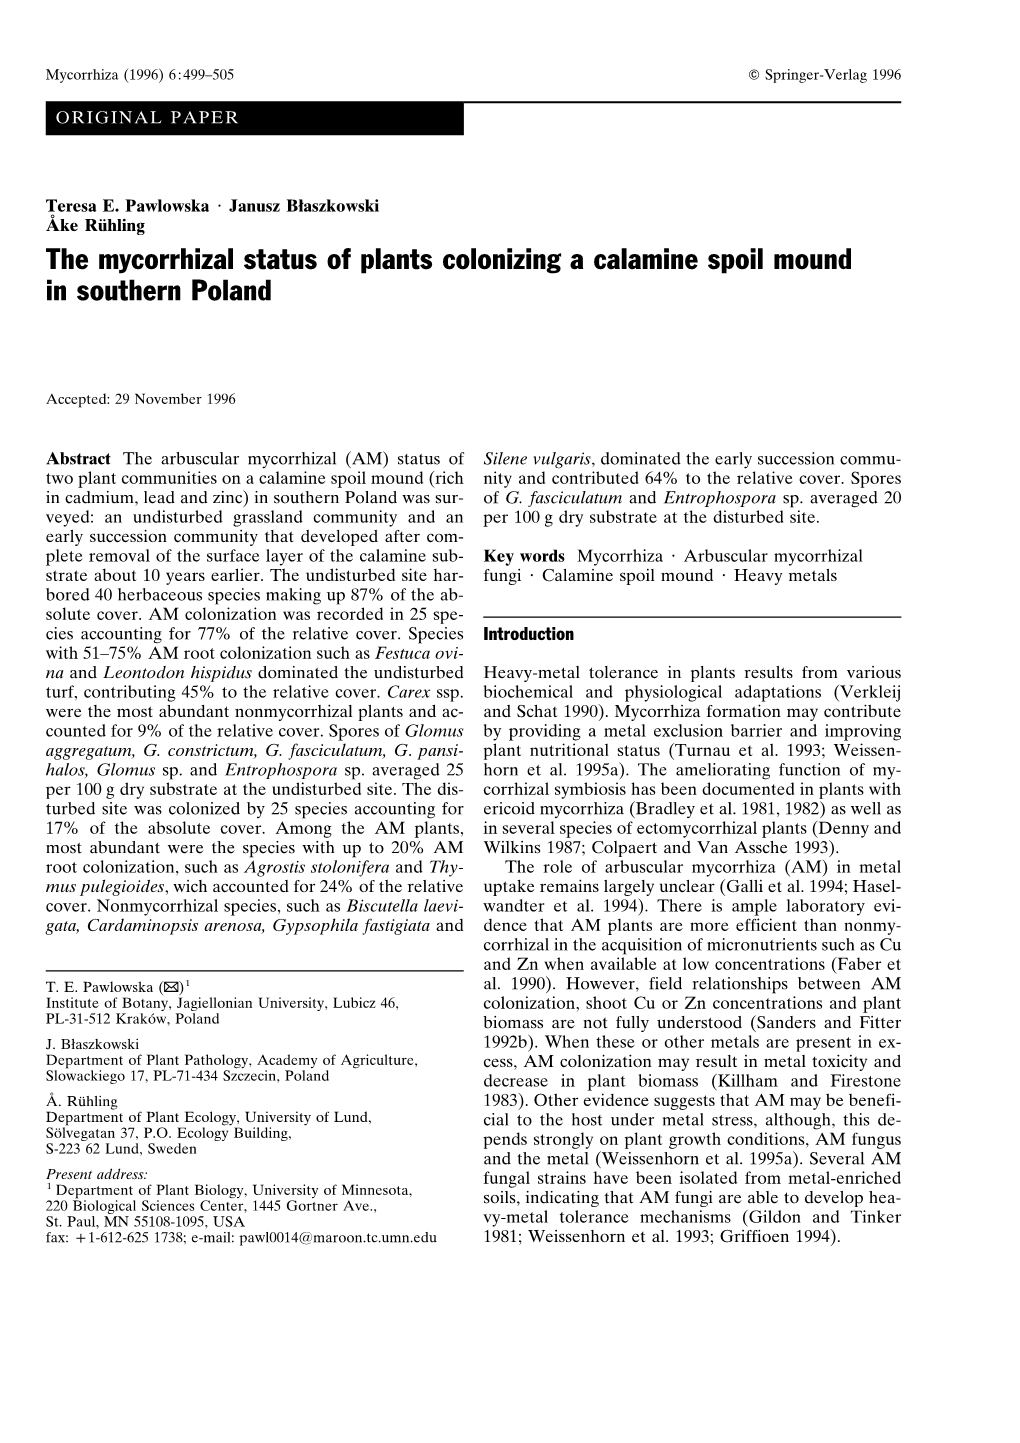 The Mycorrhizal Status of Plants Colonizing a Calamine Spoil Mound in Southern Poland